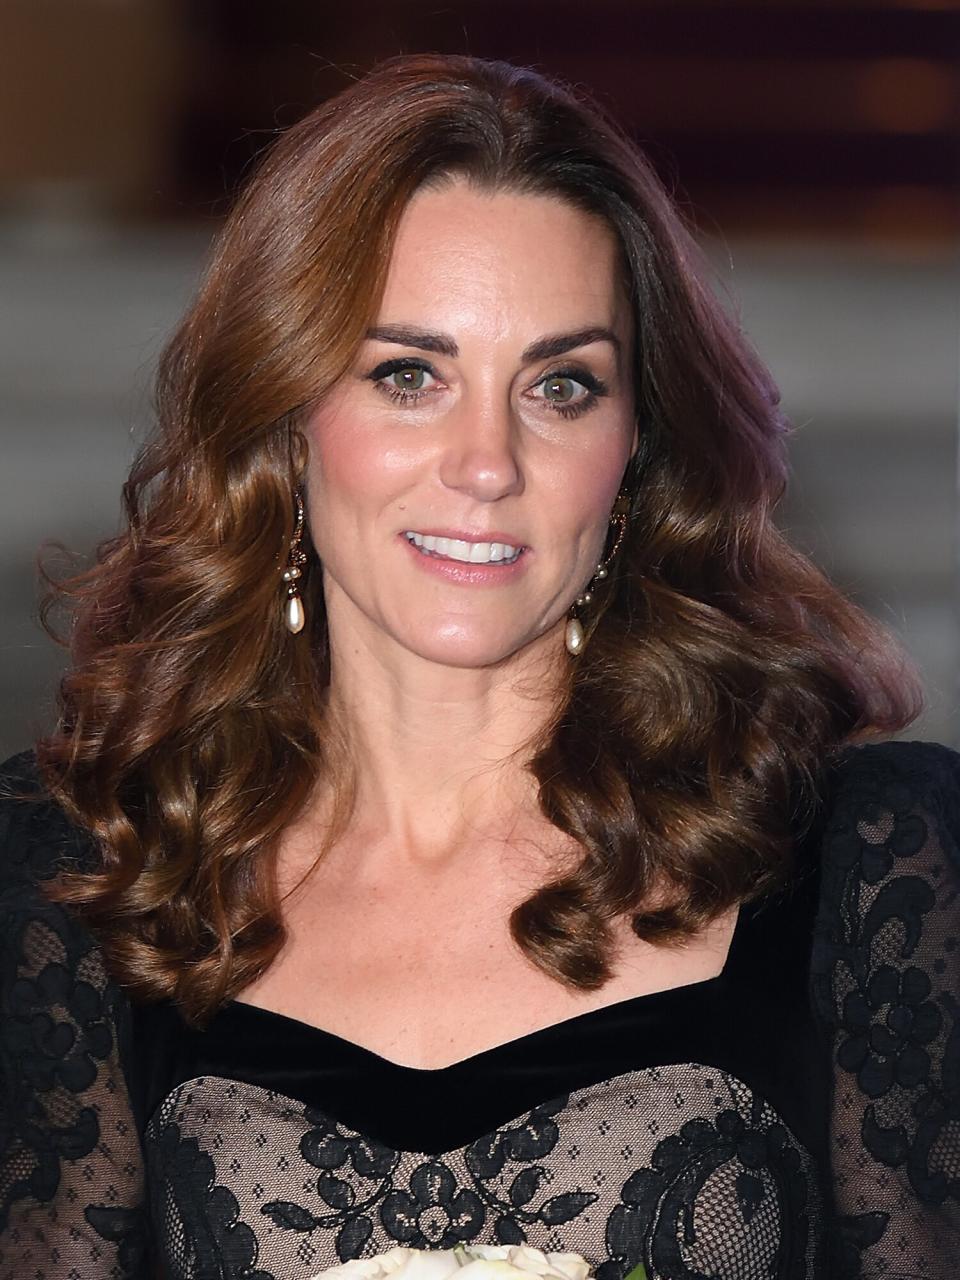 Catherine, Duchess of Cambridge departs after attending the Royal Variety Performance with Prince William, Duke of Cambridge at the London Palladium on November 18, 2019 in London, England